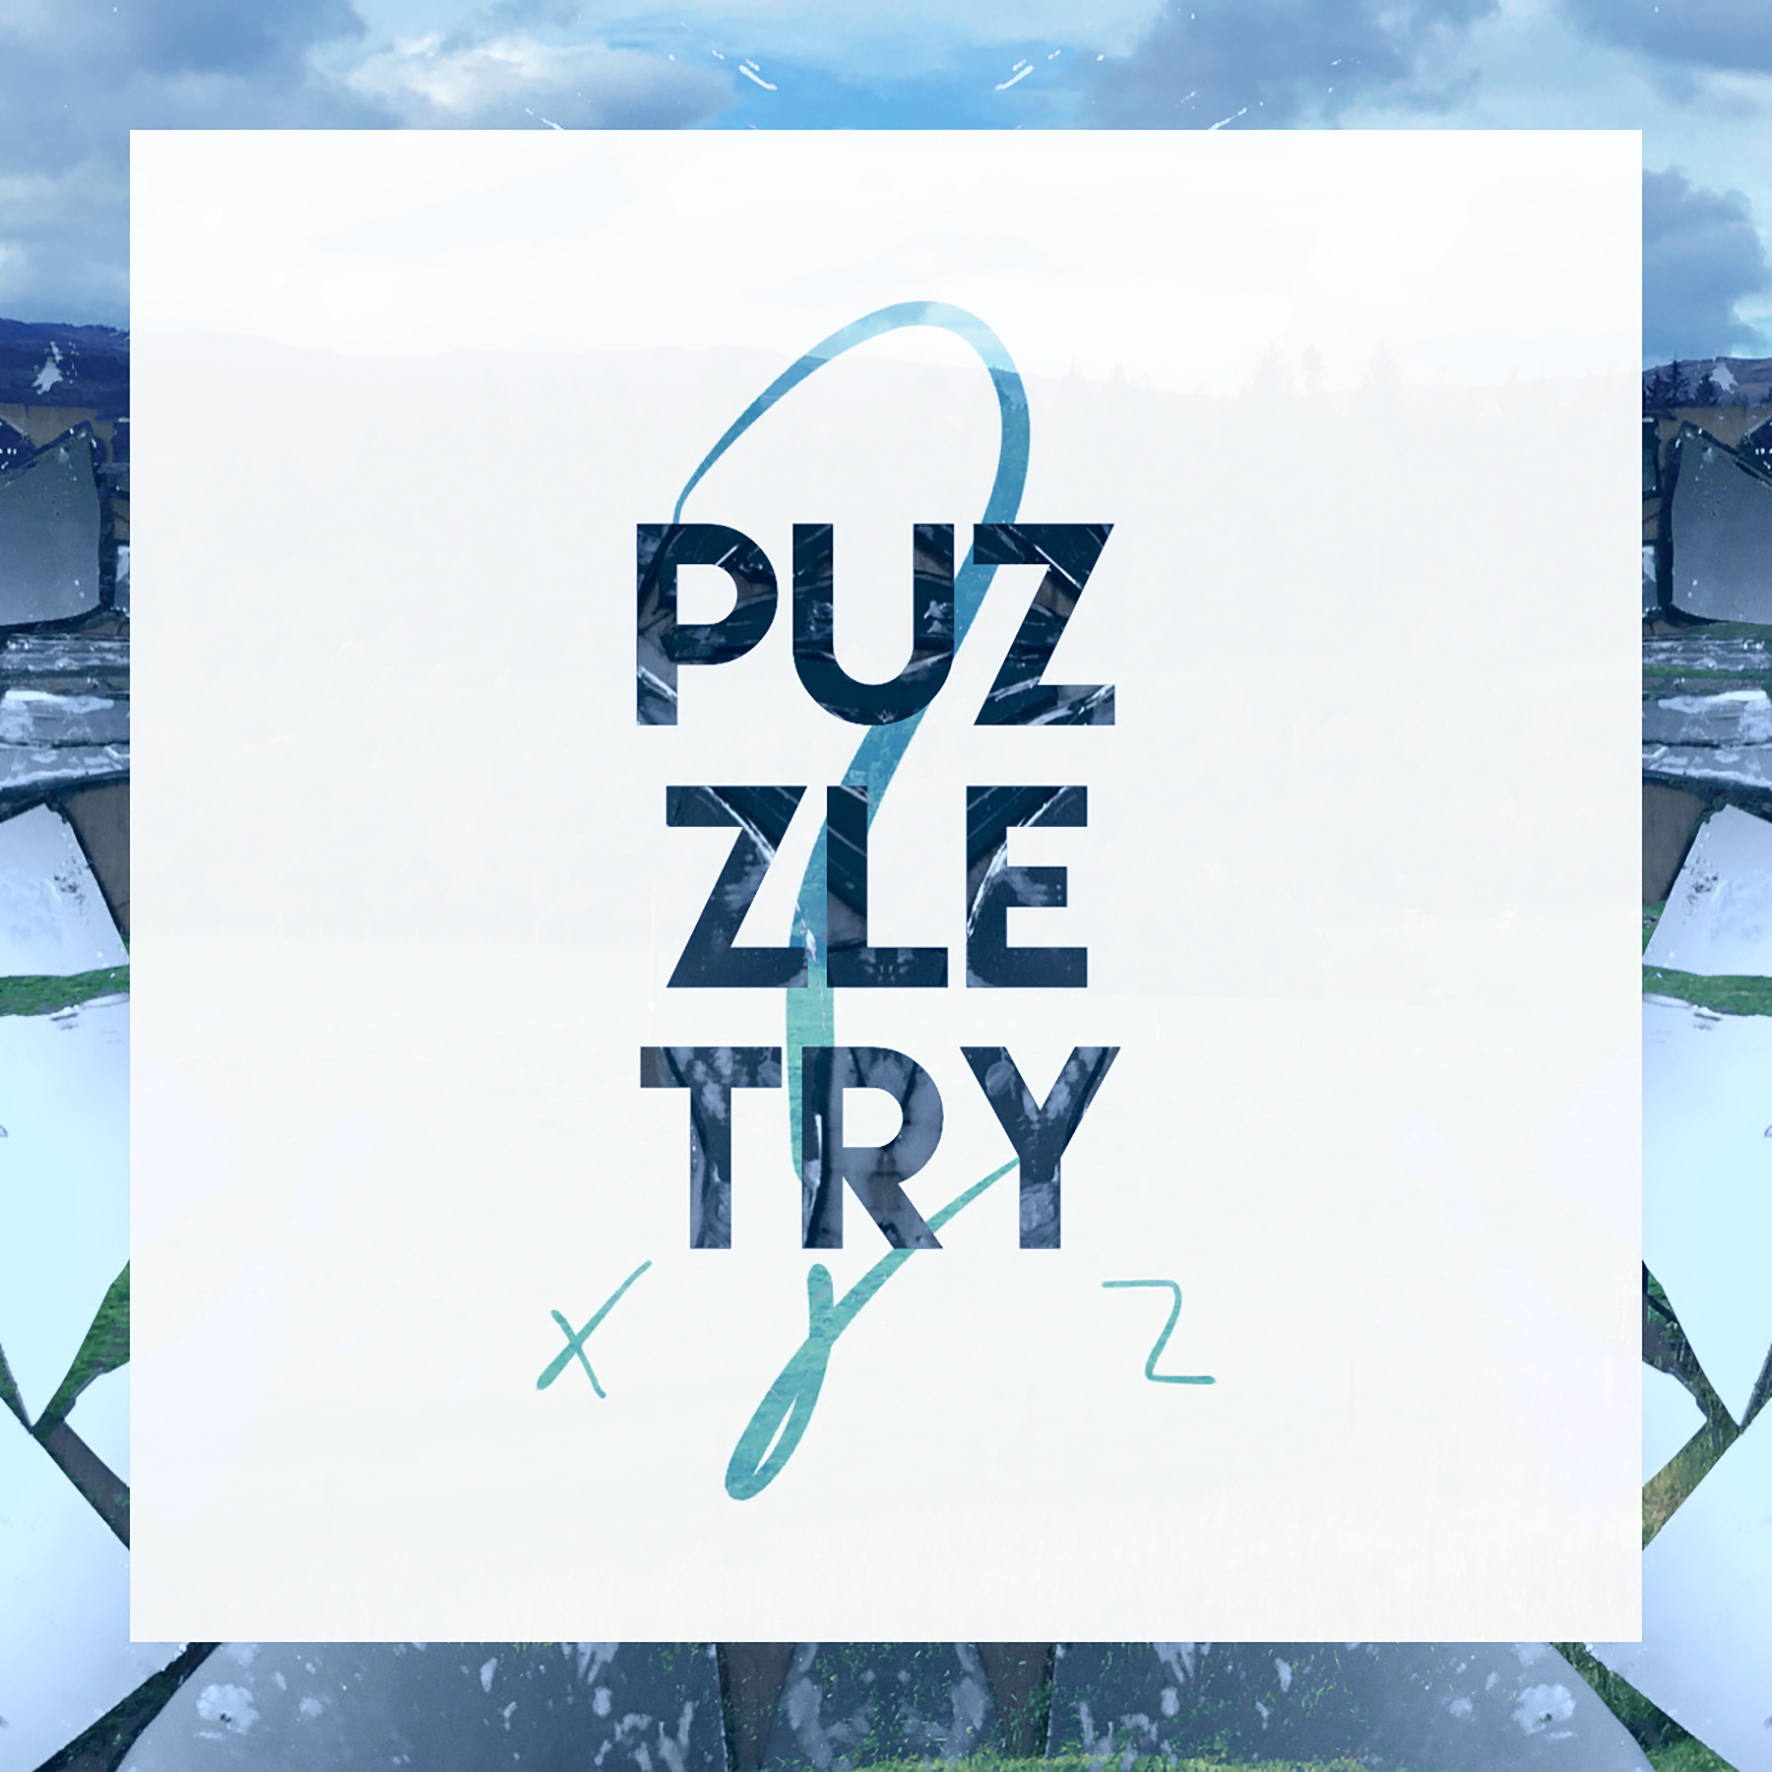 Puzzletry logo